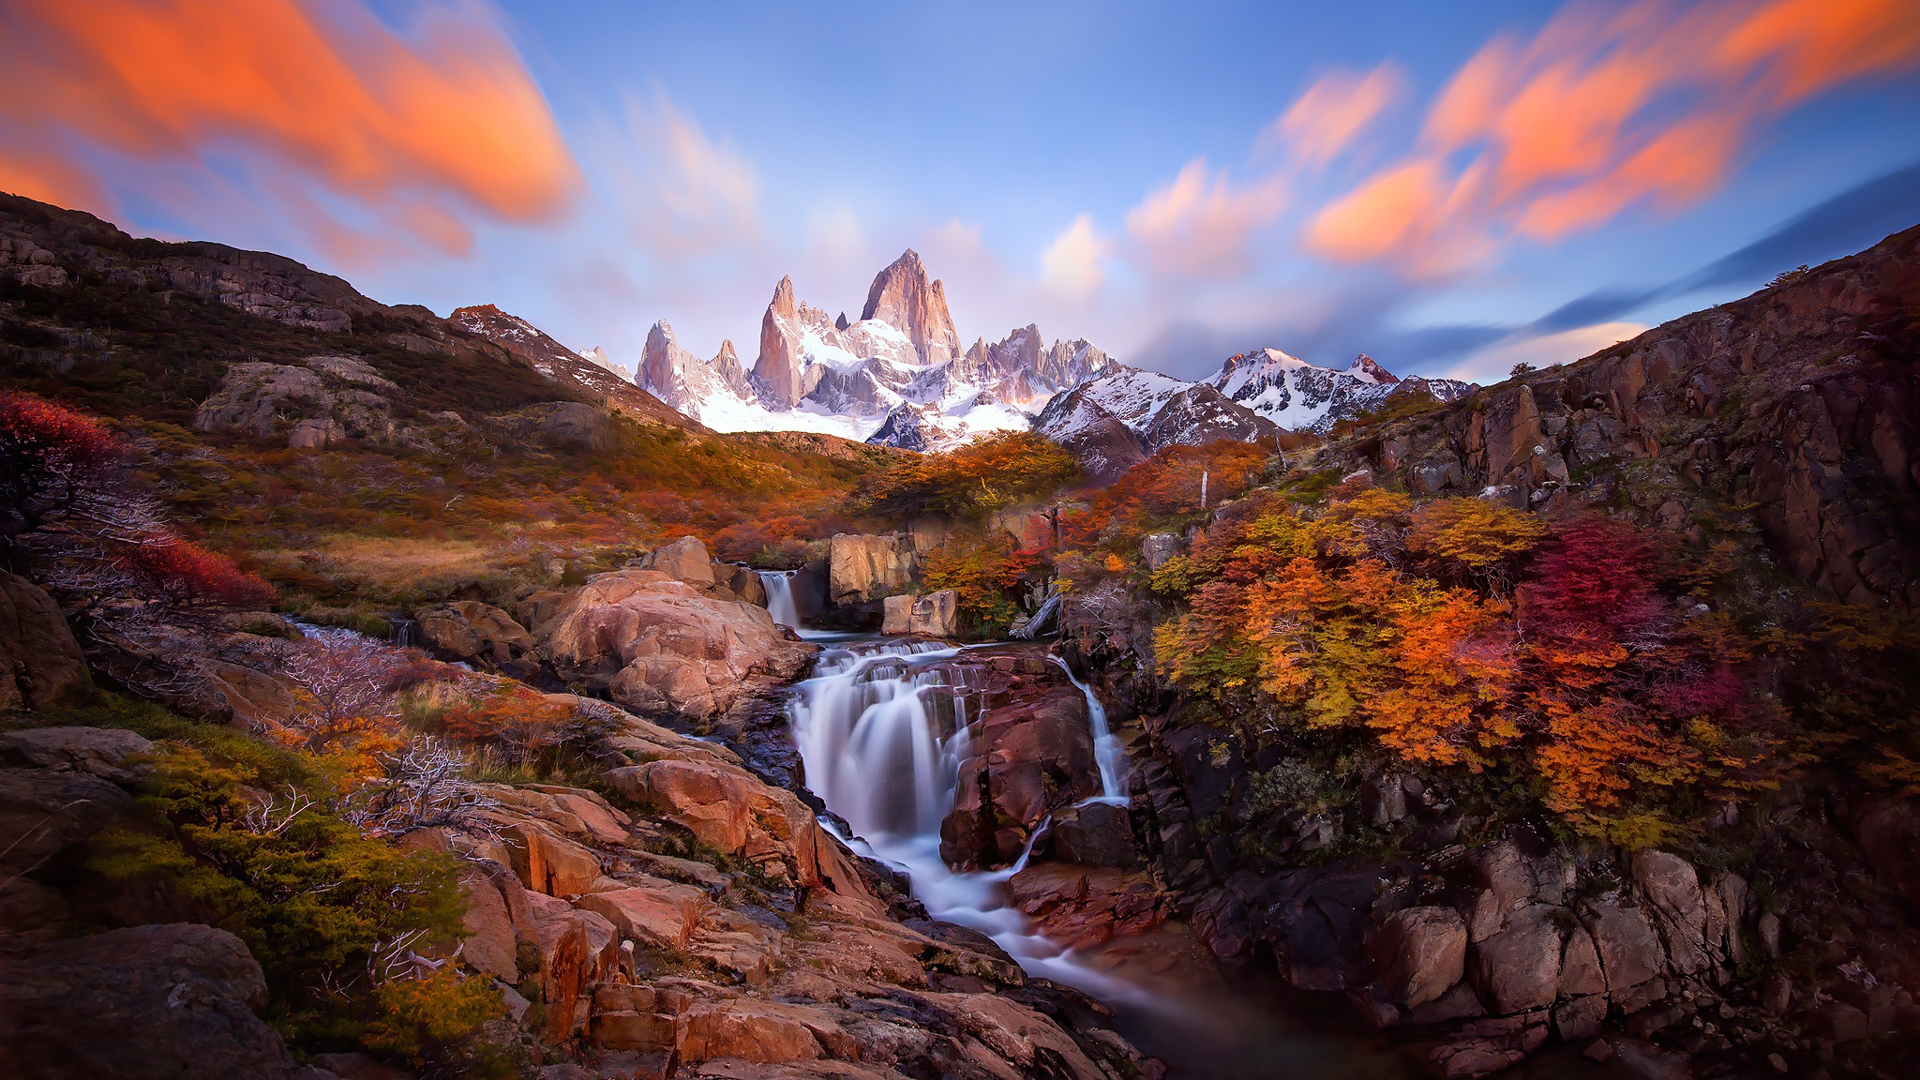 Waterfall Stream From Rocks Colorful Autumn Trees Snow Capped Mountains Under White Clouds Blue Sky 2K Nature